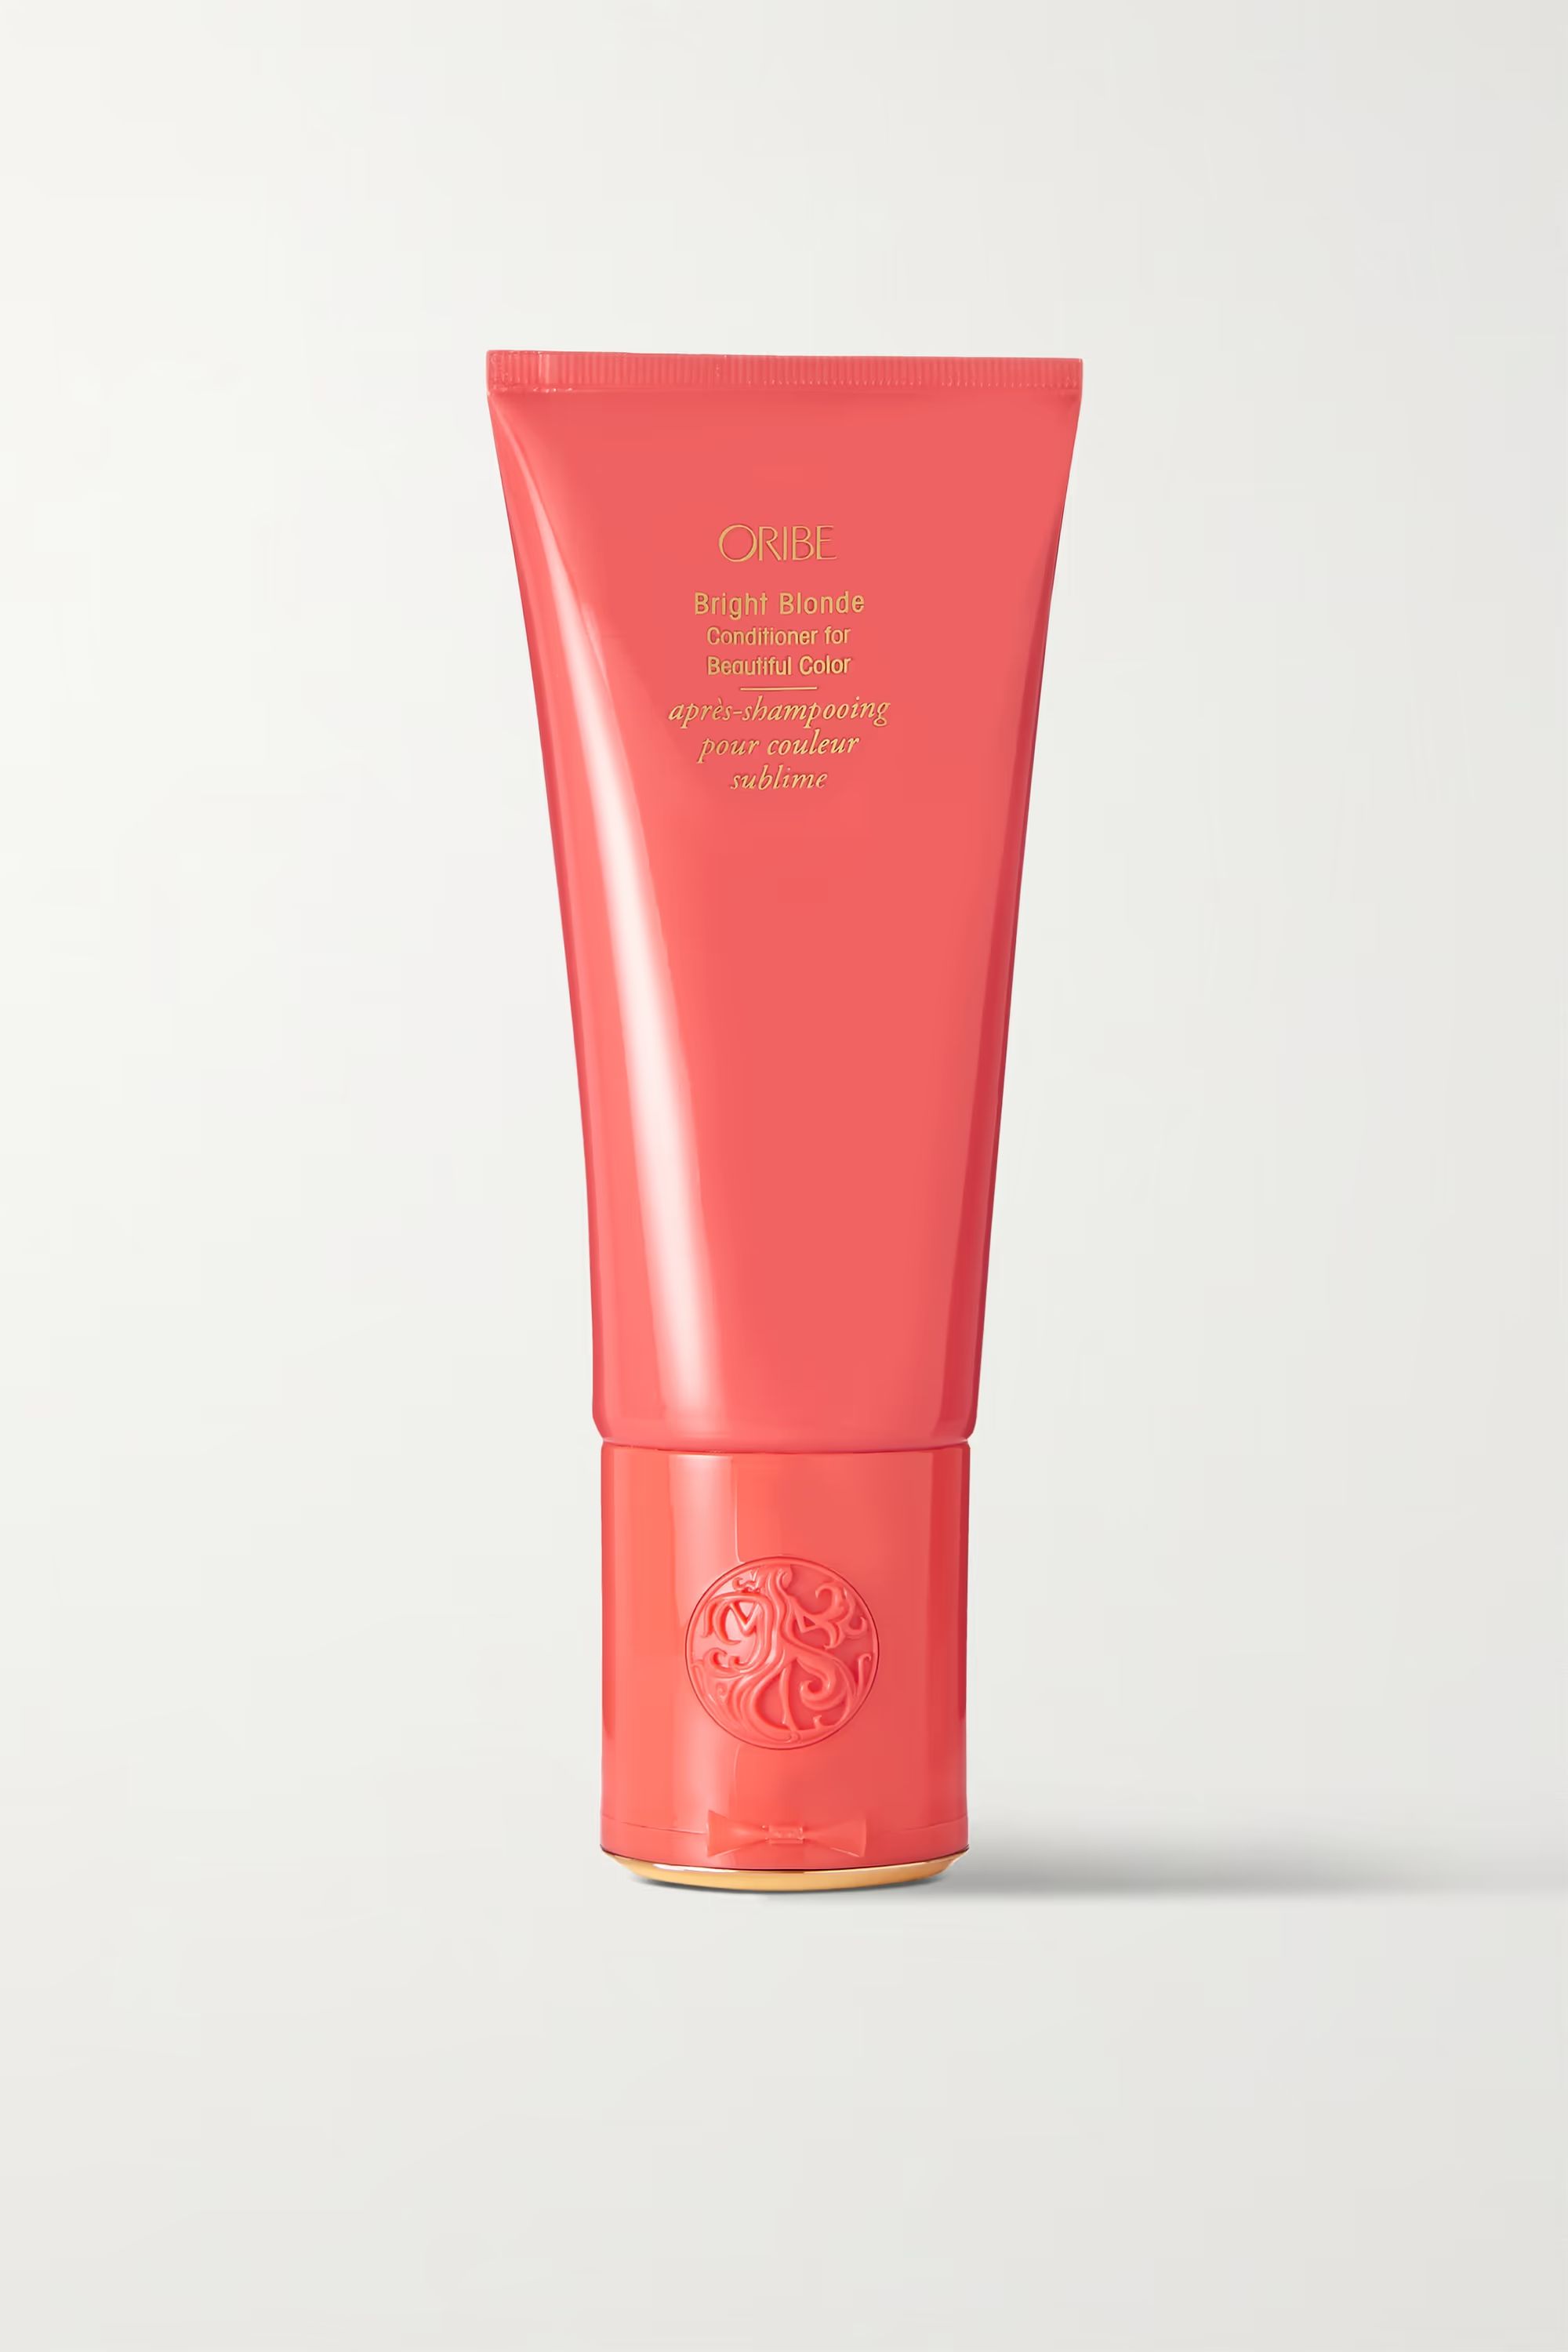 Bright Blonde Conditioner for Beautiful Color, 200ml | NET-A-PORTER (US)